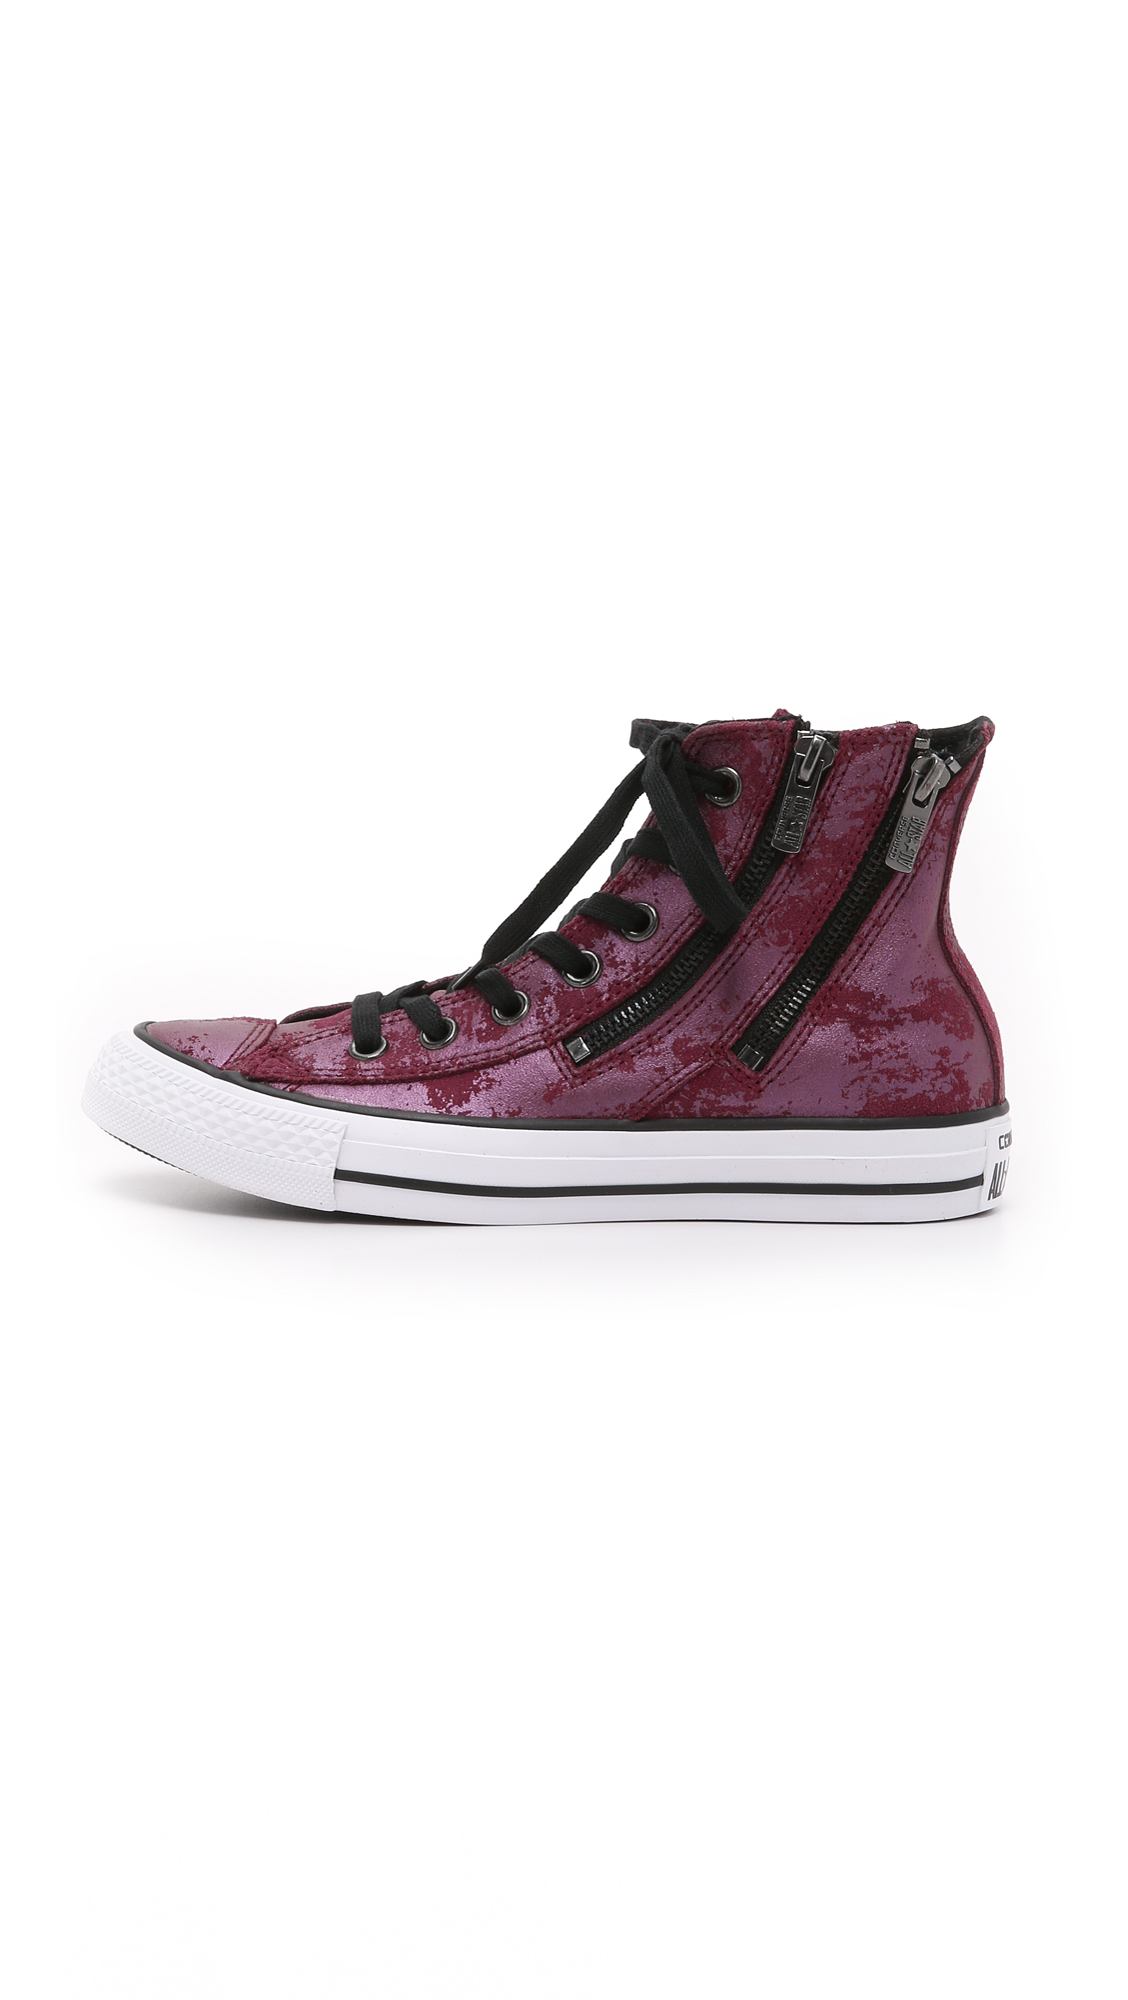 Converse Leather Chuck Taylor All Star Dual Zip High Top Sneakers ... عطر جيفنشي